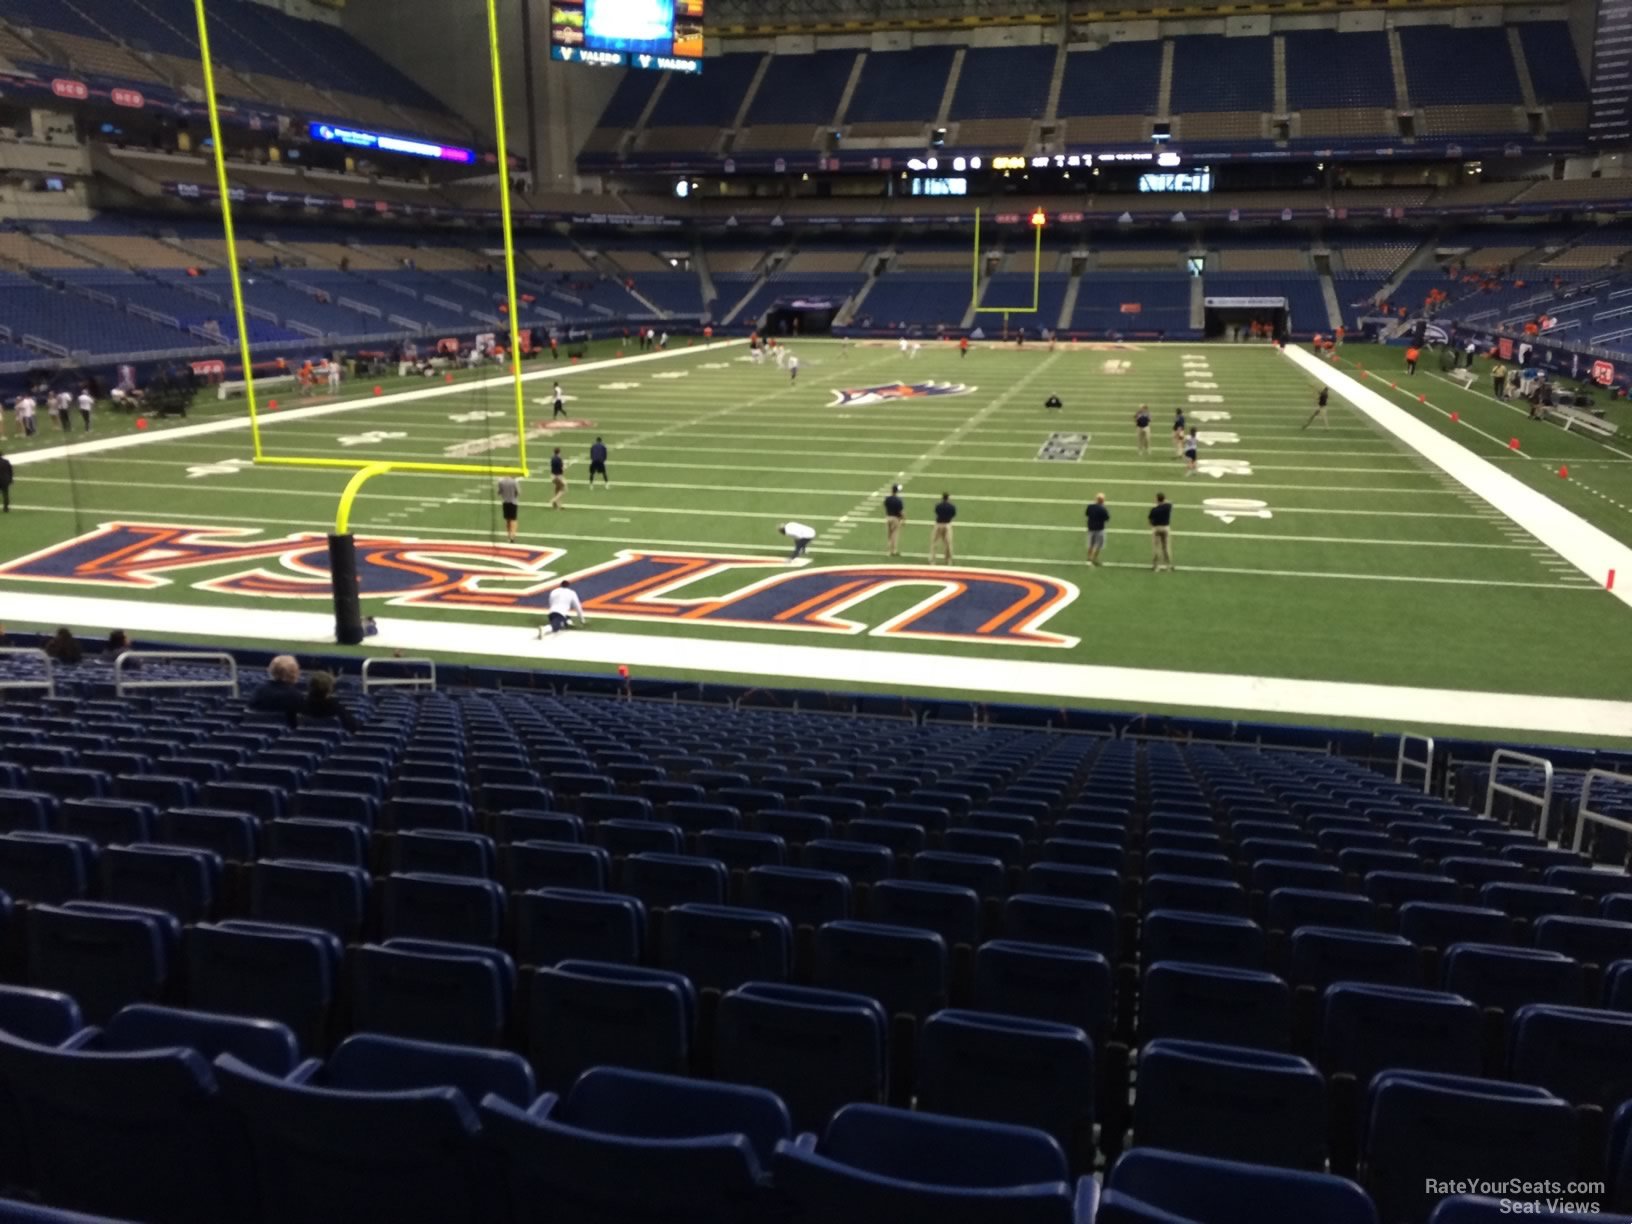 section 144, row 18 seat view  for football - alamodome